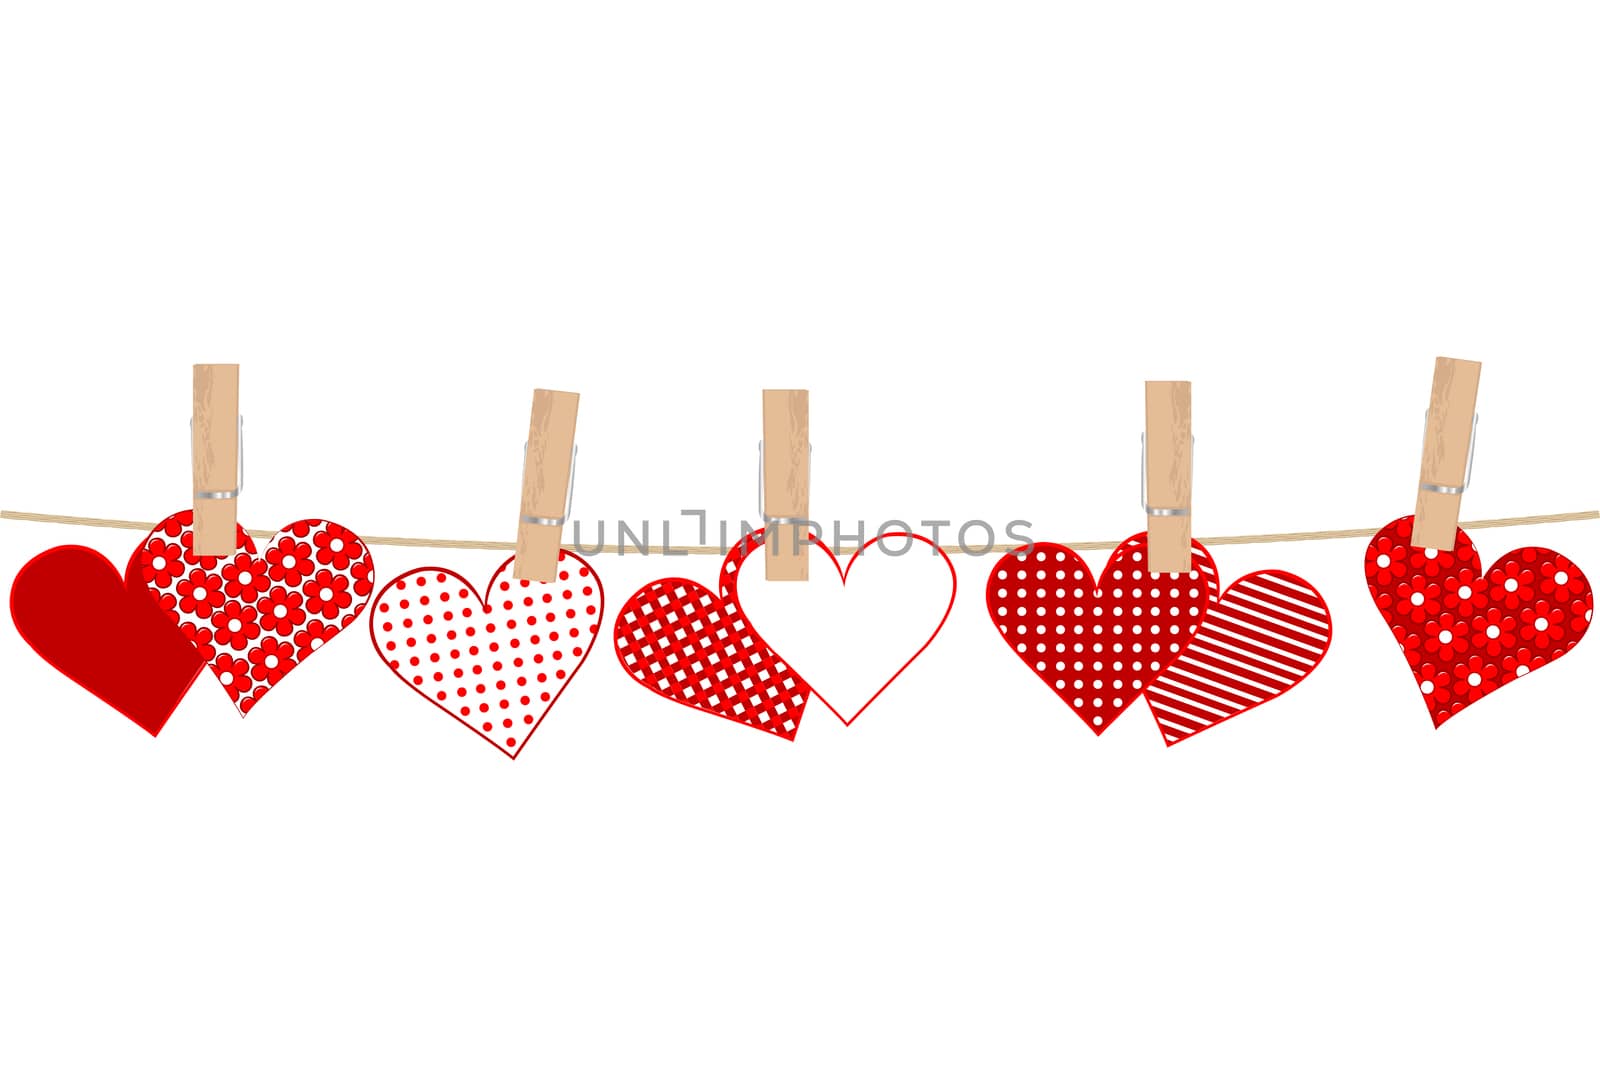 Valentines day concept with hearts and clothes pegs on rope